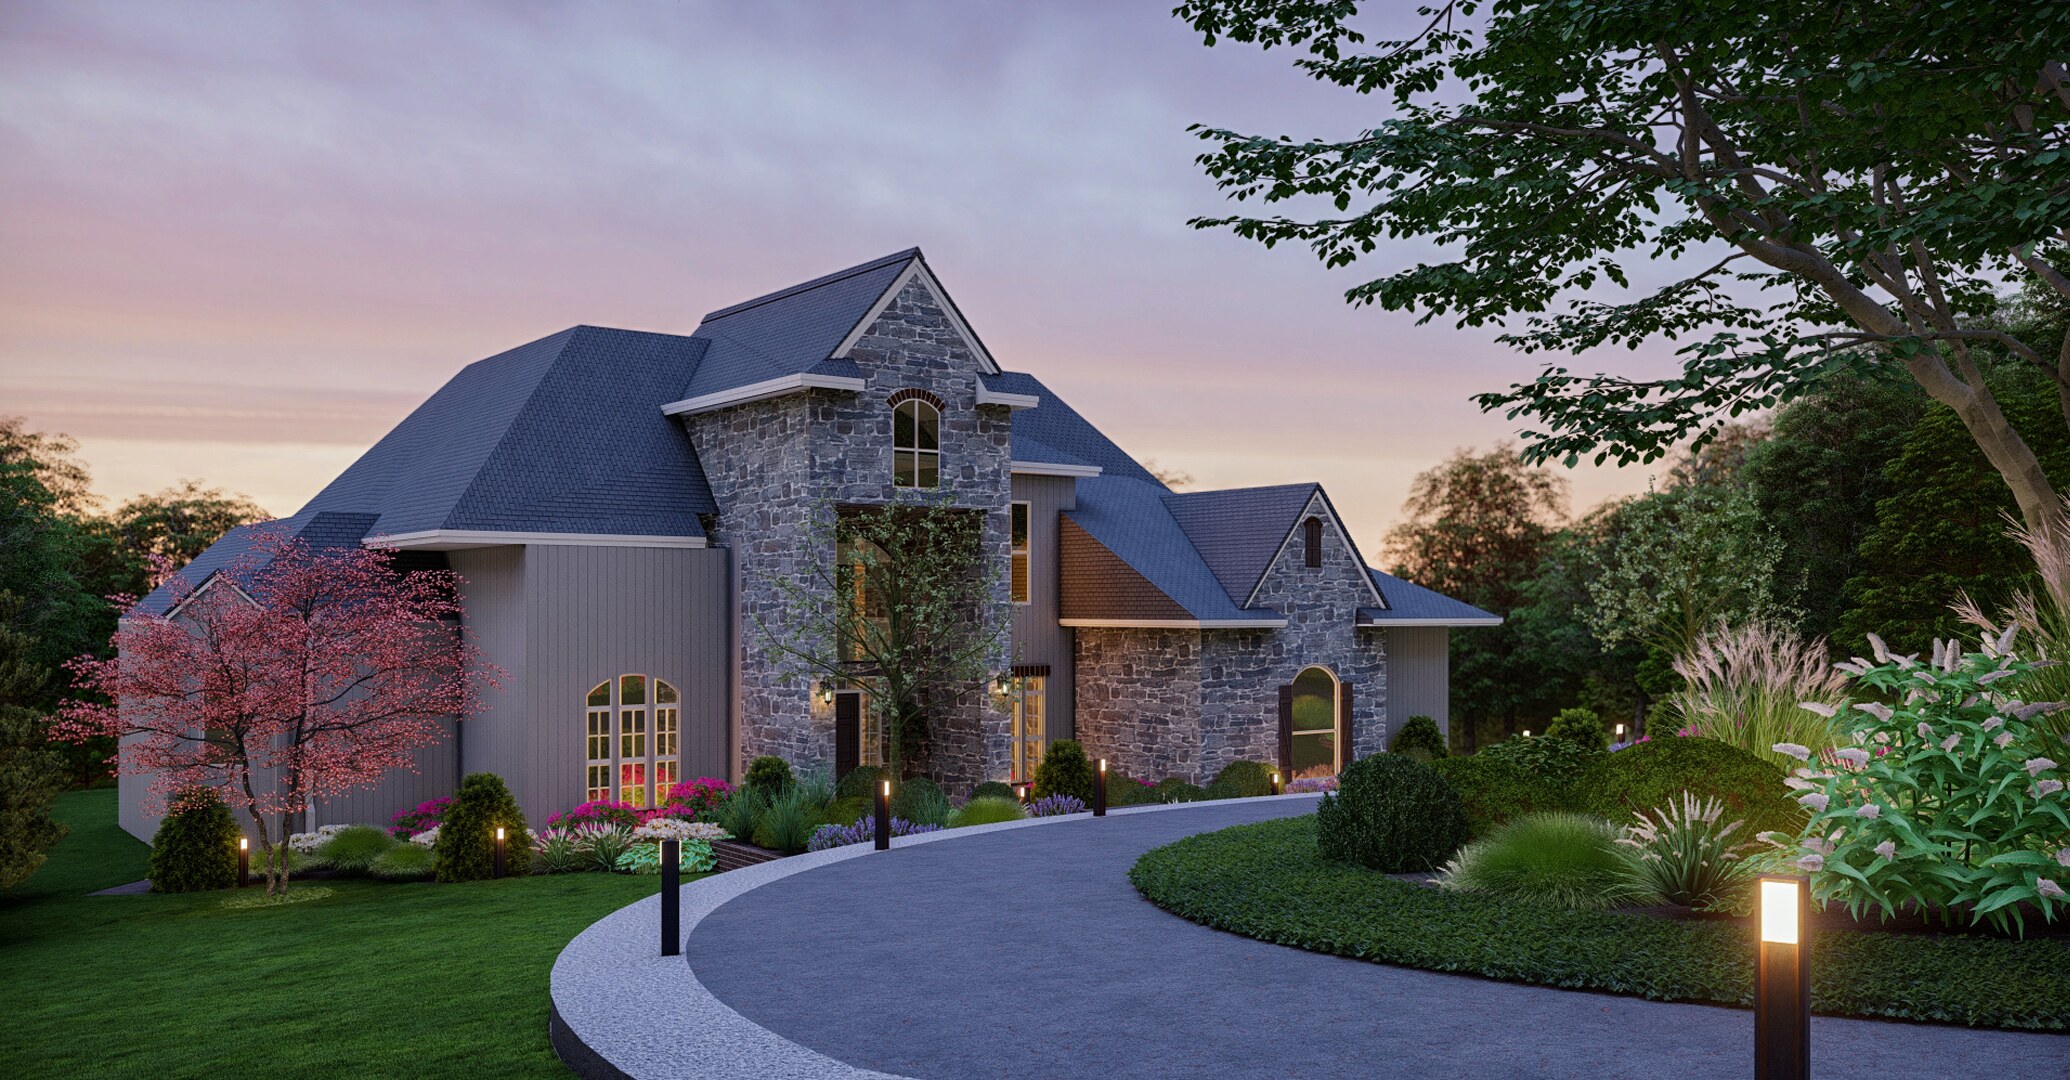 3D Rendered Image of Front Yard Transformation with Circular Driveway, Abundant Greenery, and Exterior Lighting